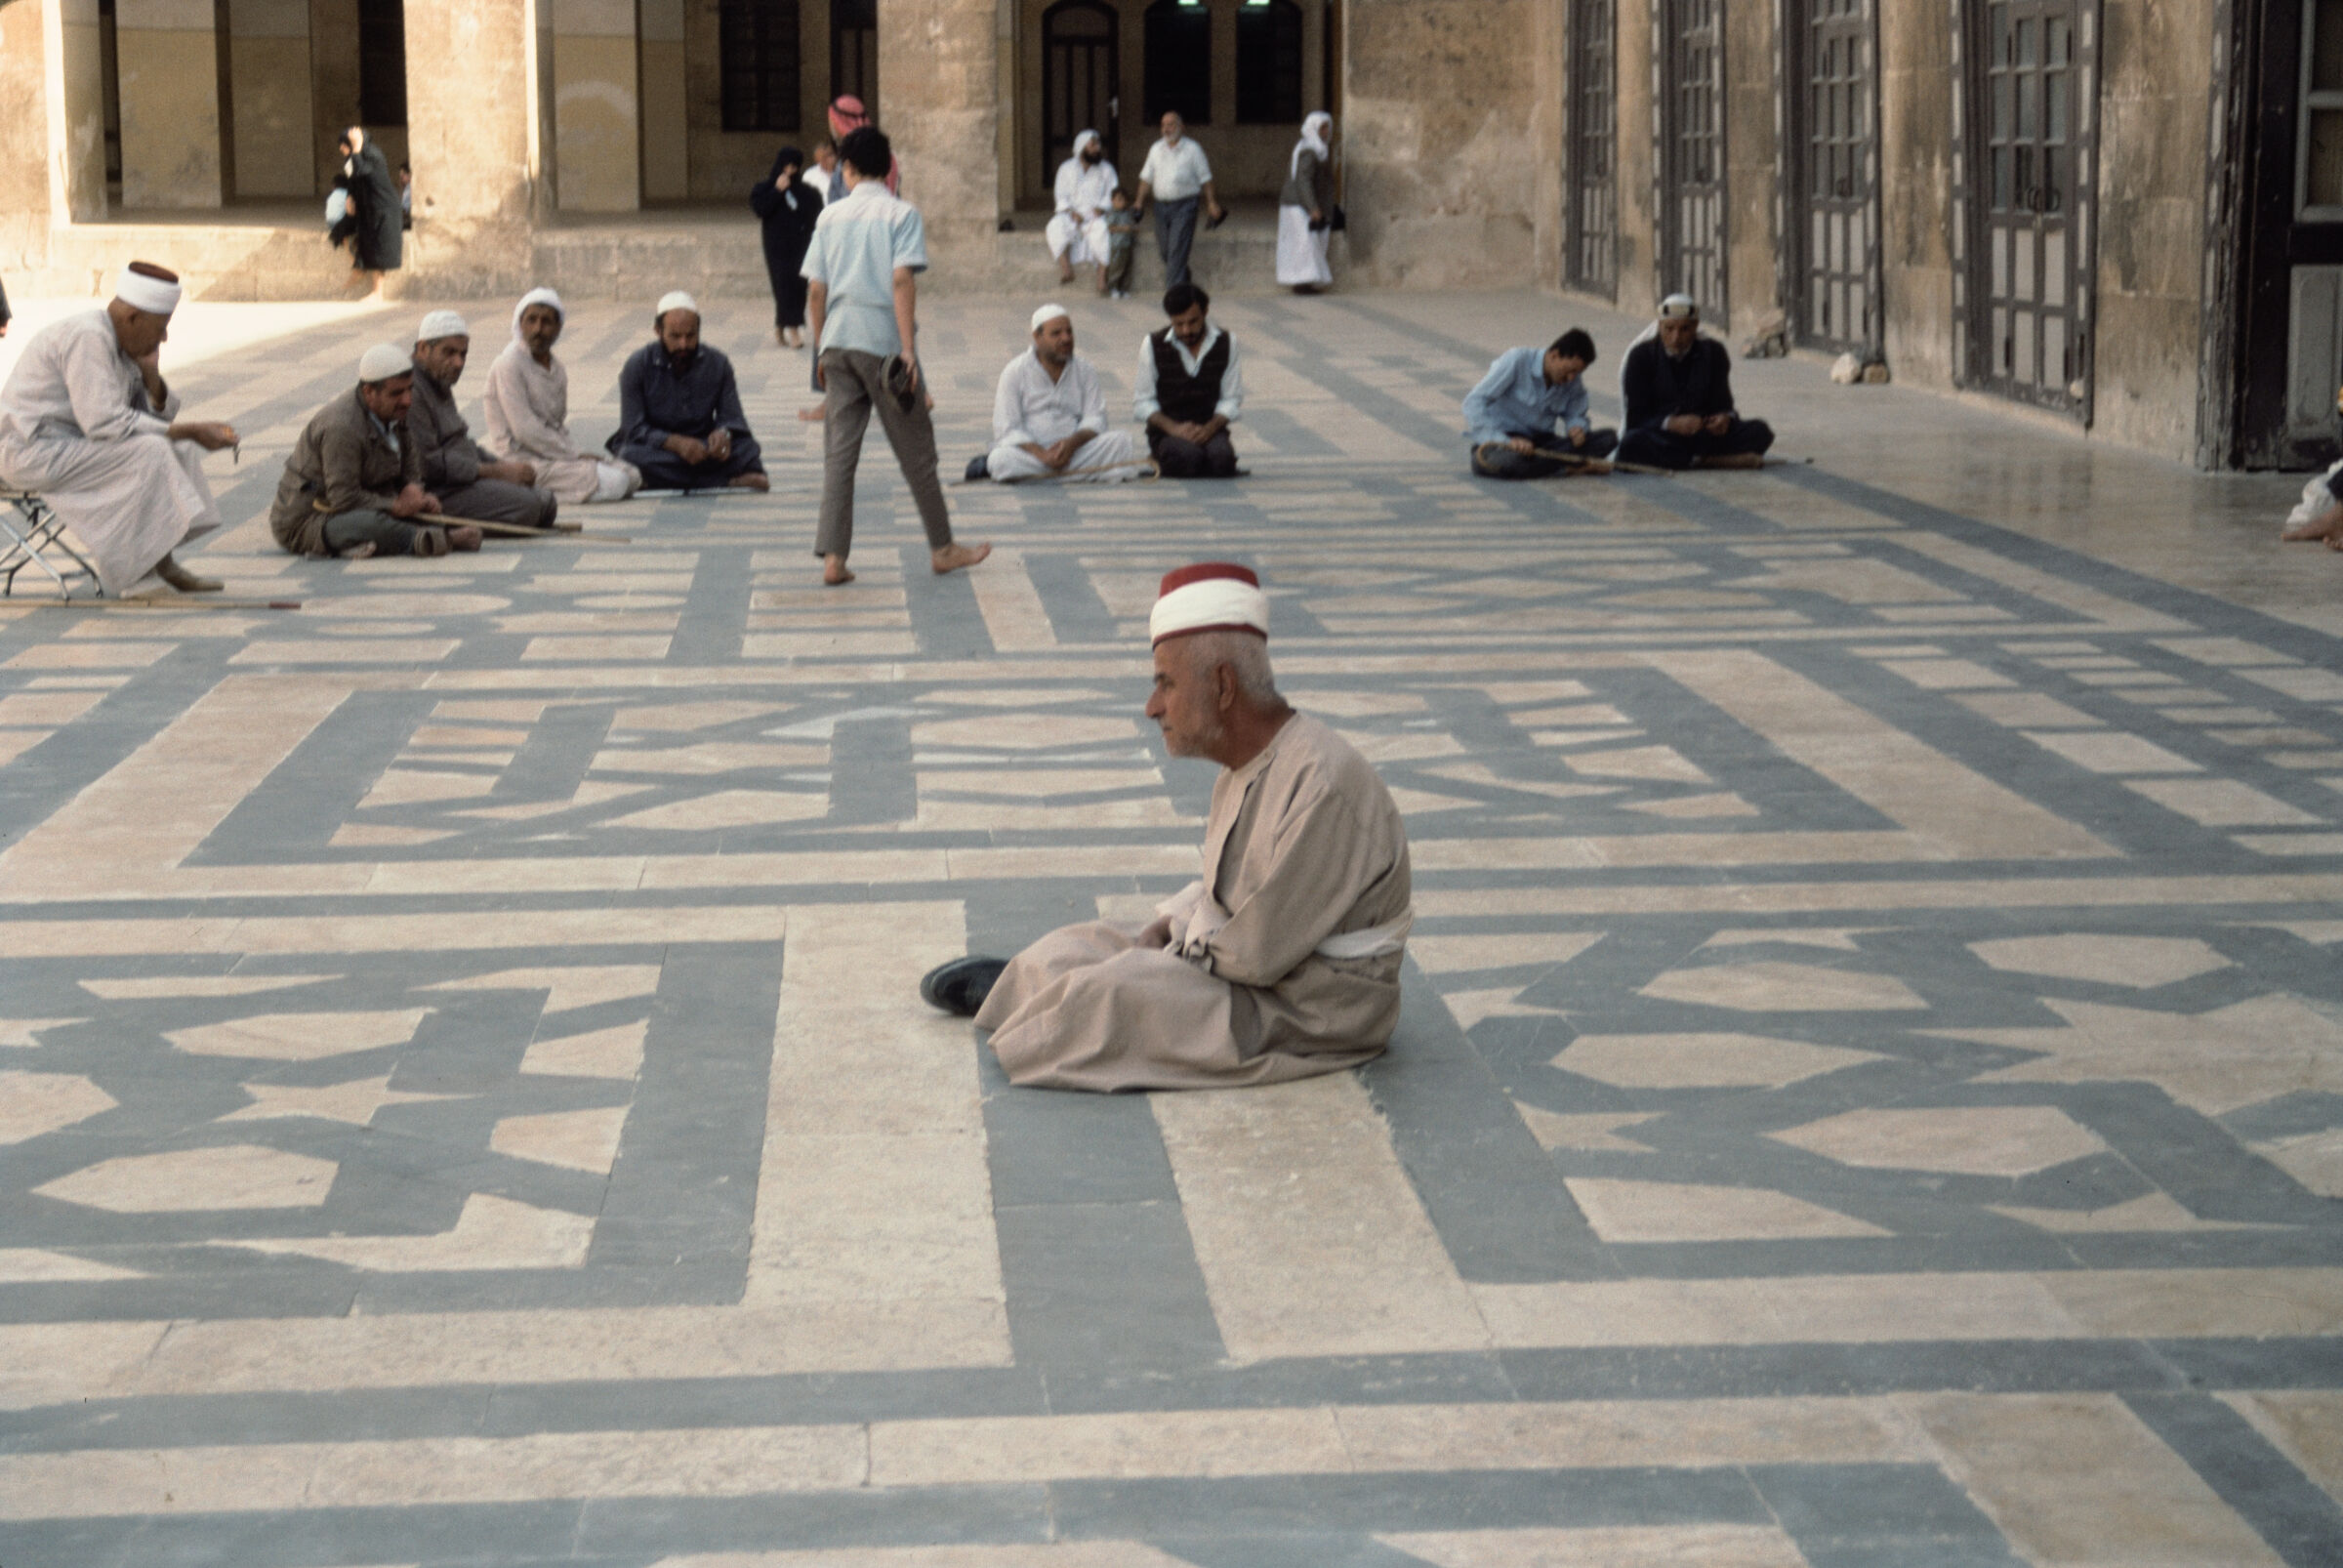 People gathered in the courtyard of the Umayyad Mosque, Damascus